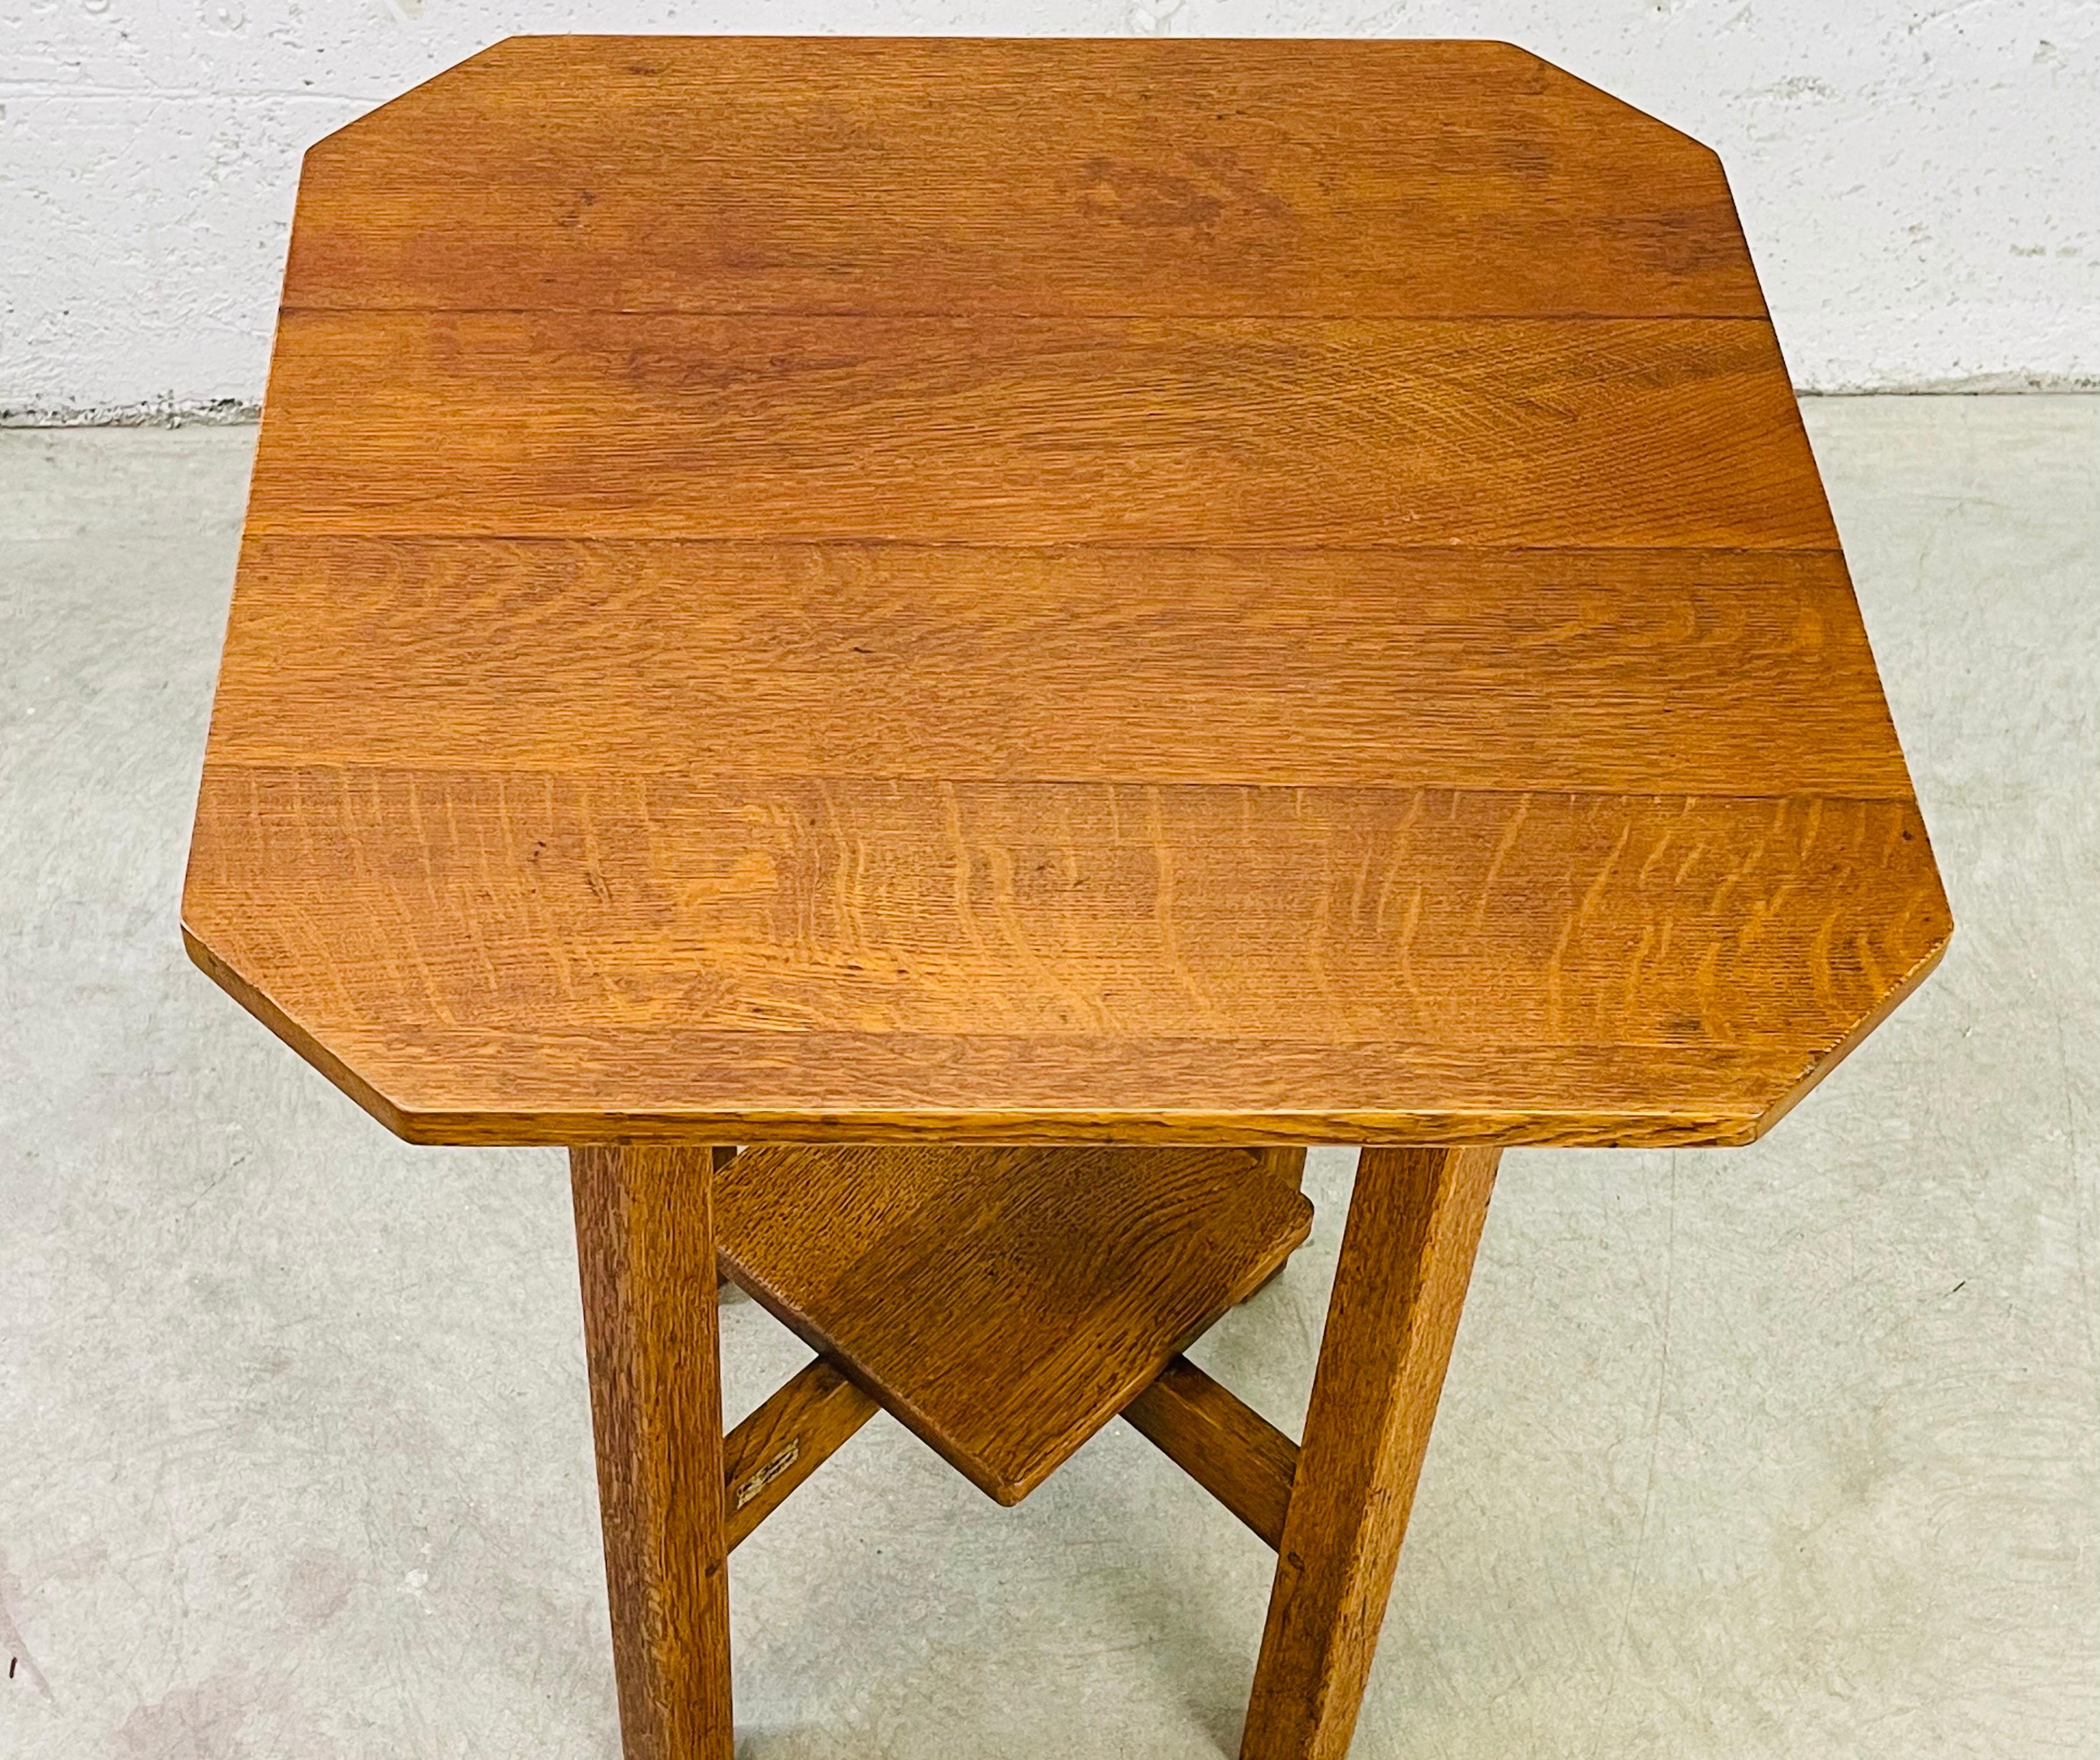 L. & J. G. Stickley quarter sawn oak square clip-corner lamp table circa 1910. The table has an additional shelf underneath for storage. This table has been carefully restored to the original condition retaining the original foil label.